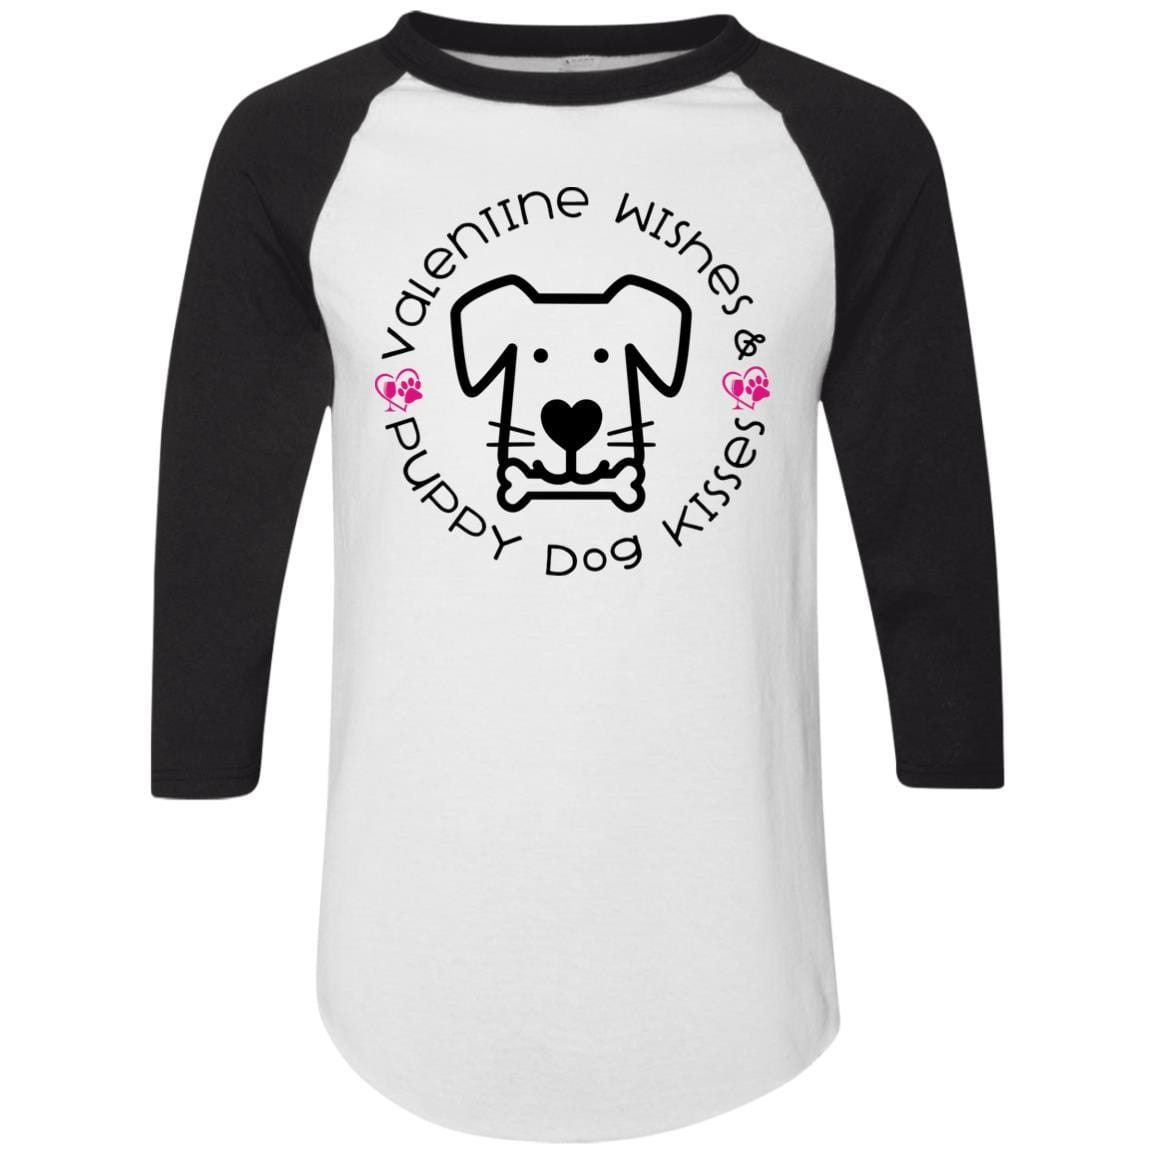 T-Shirts White/Black / S Winey Bitches Co 'Valentine Wishes and Puppy Dog Kisses" (Dog) Colorblock Raglan Jersey WineyBitchesCo